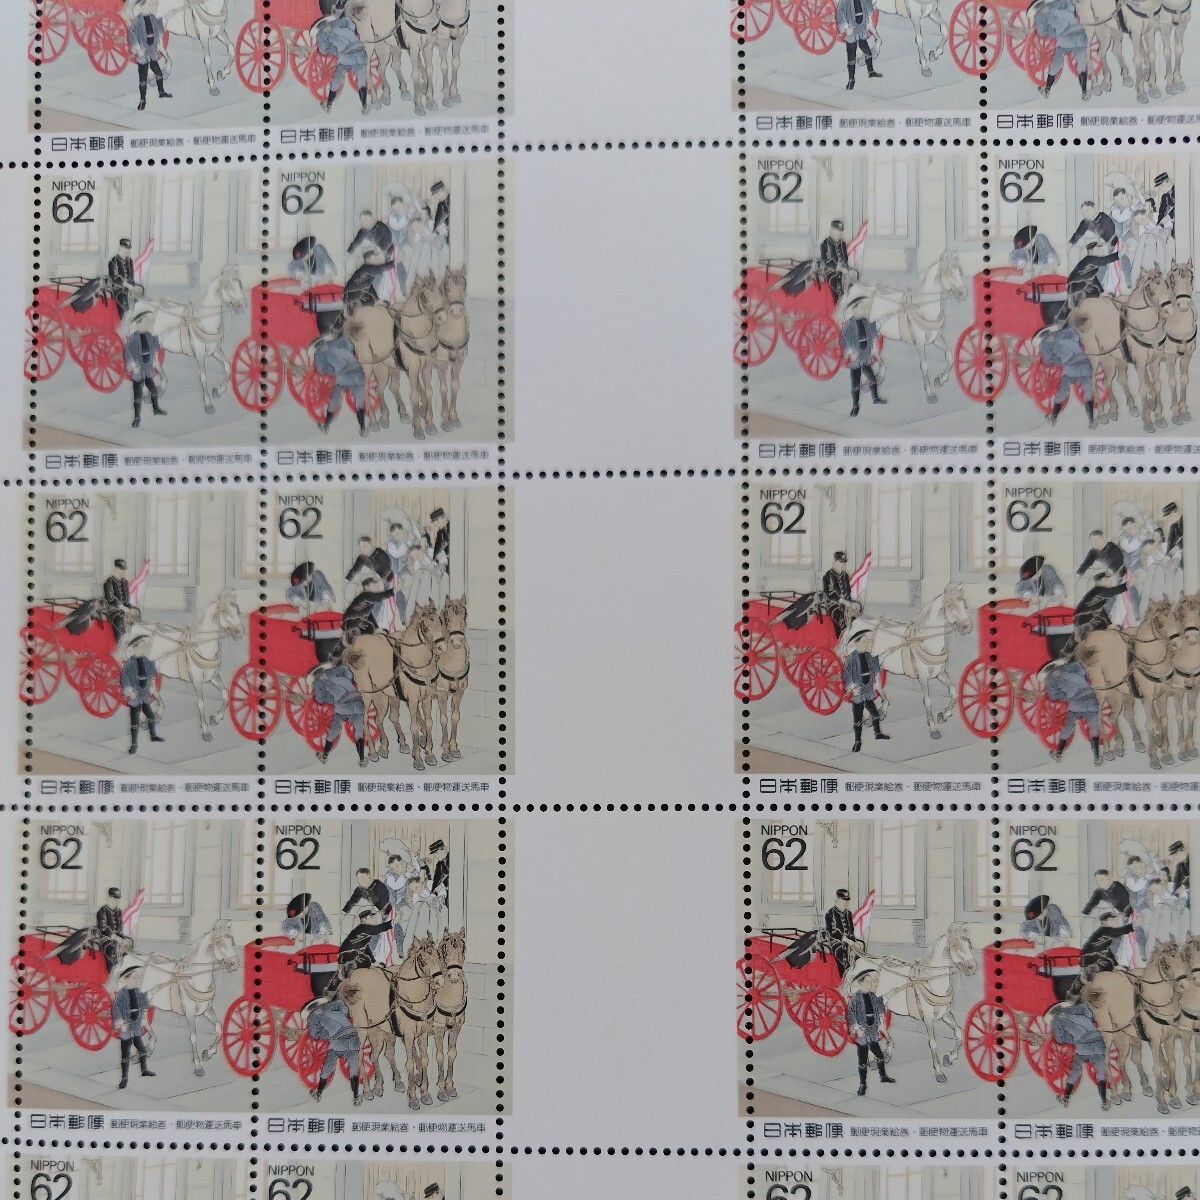  Heisei era 3 year issue special stamp,[ Uma to Bunka series no. 4 compilation mail reality industry . volume * mail thing transportation horse car .,62 jpy stamp 20 sheets,1 seat, face value 1,240 jpy.